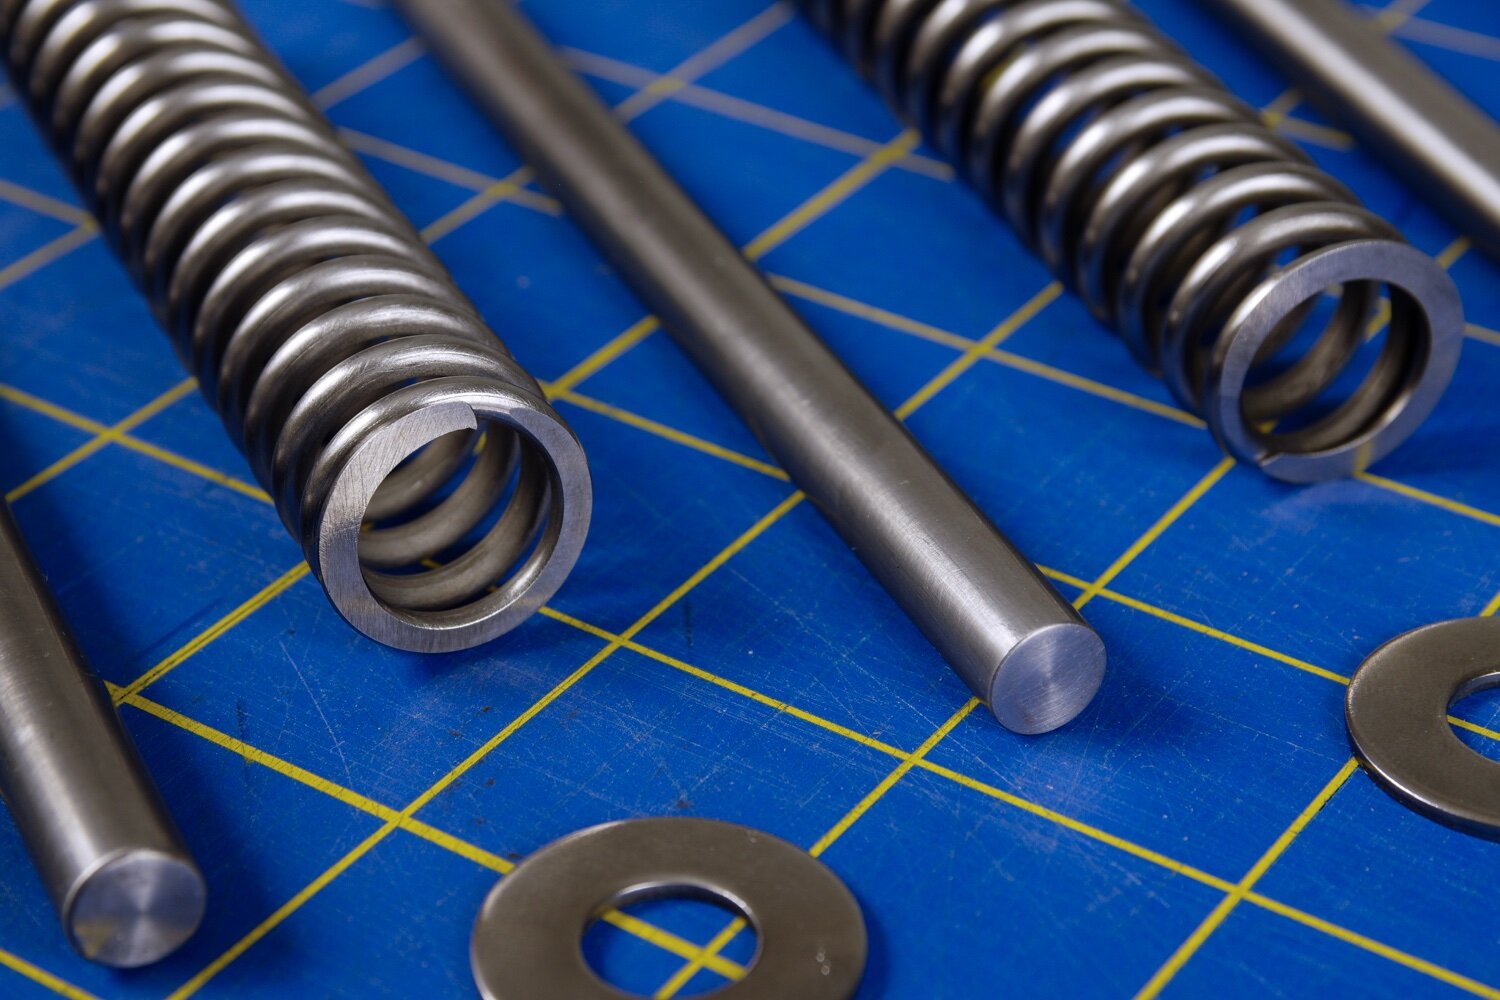  A closeup of the yoke spring assembly.  